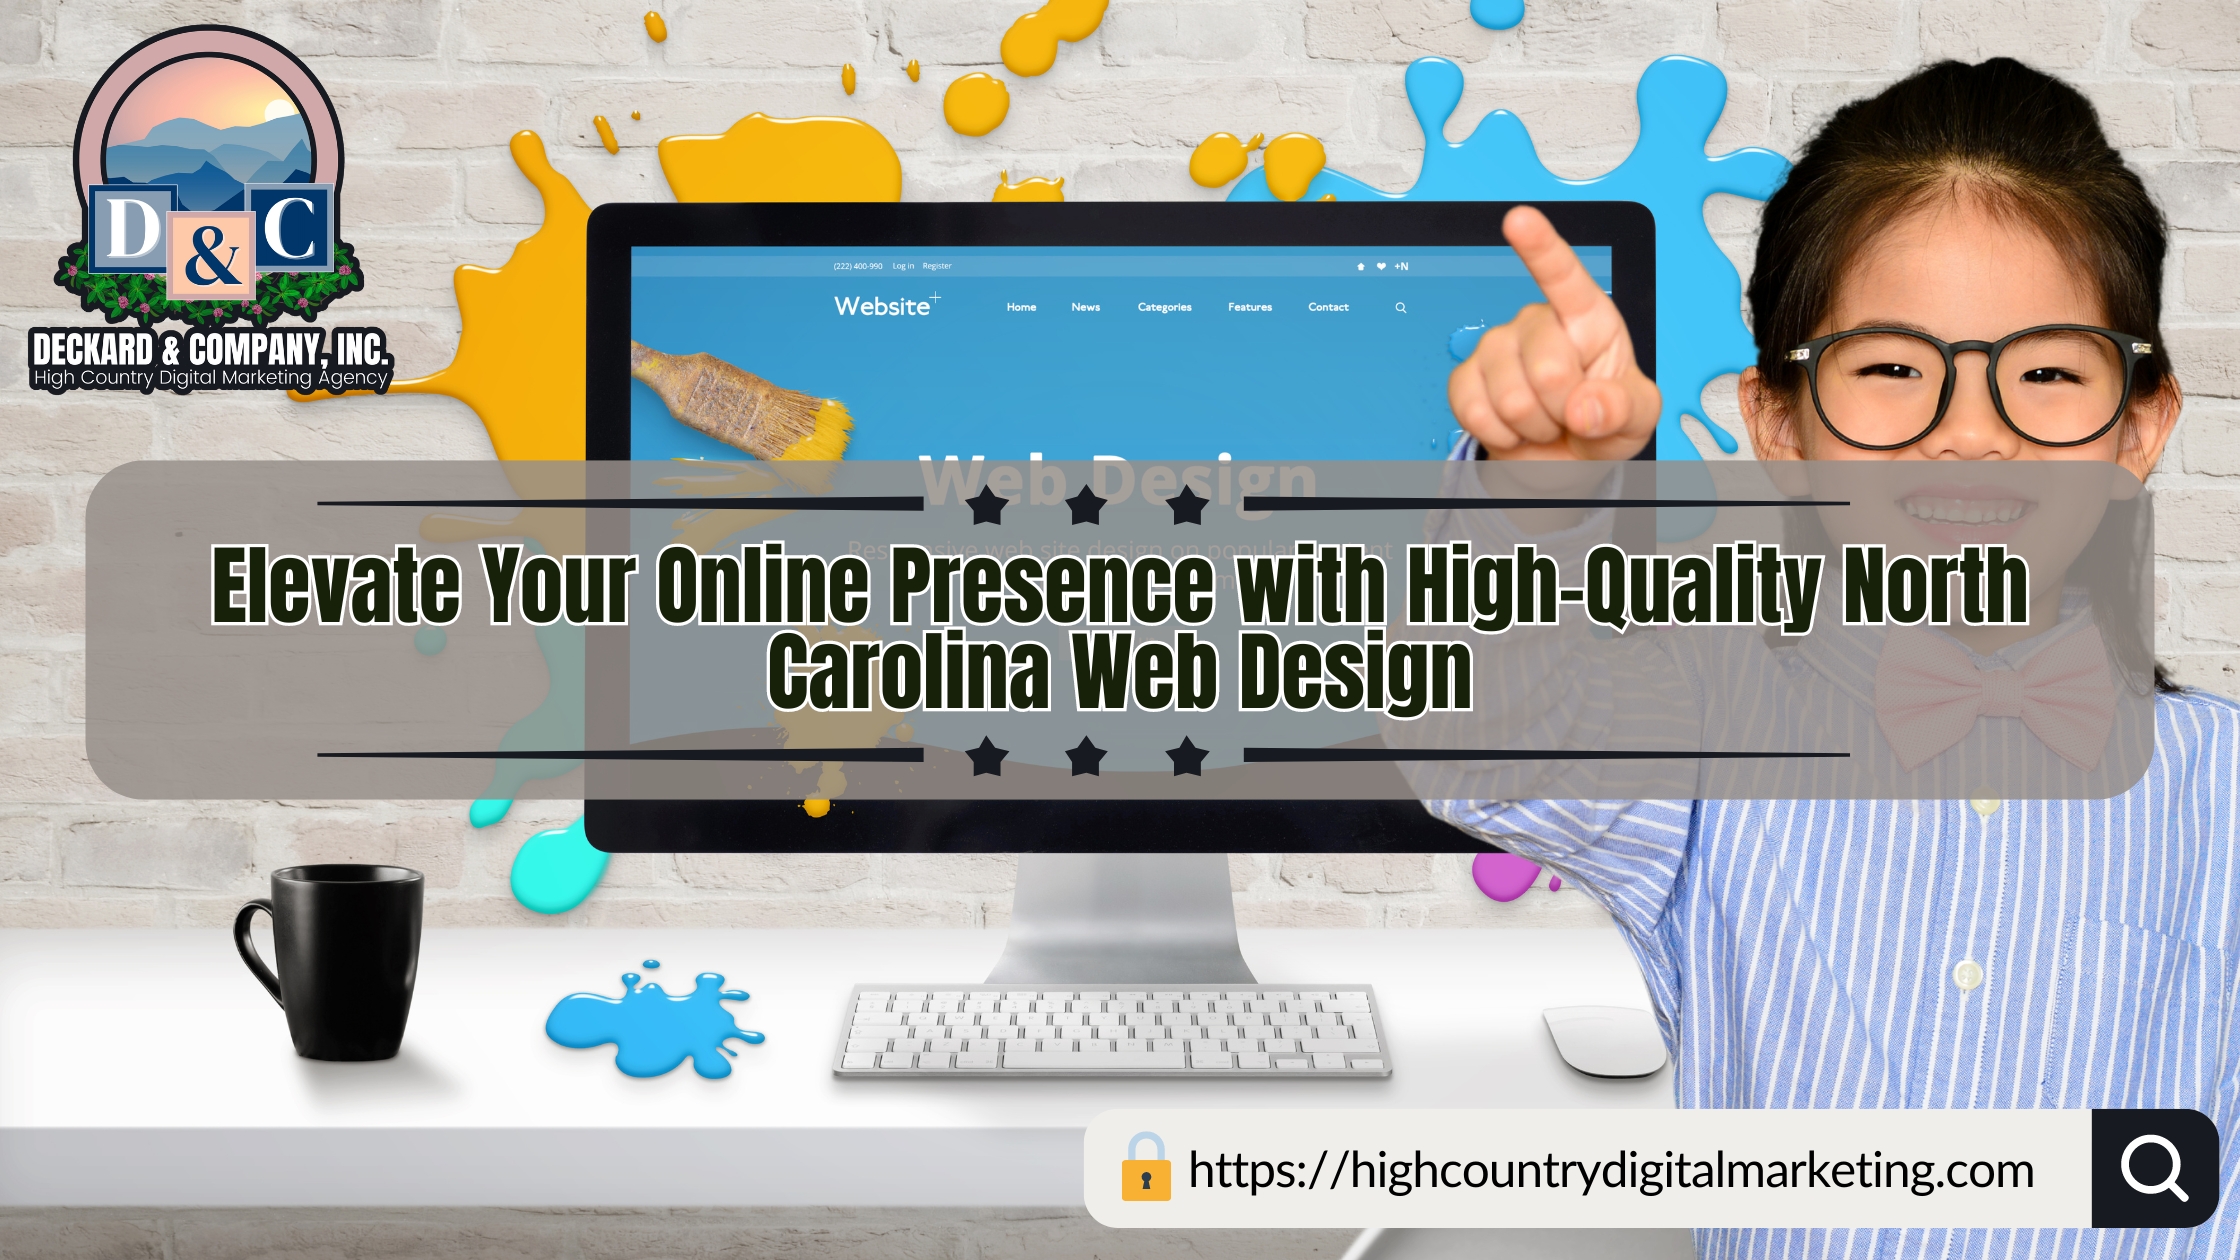 Elevate Your Online Presence with High-Quality North Carolina Web Design Agency High Country Digital Marketing with Deckard & Company